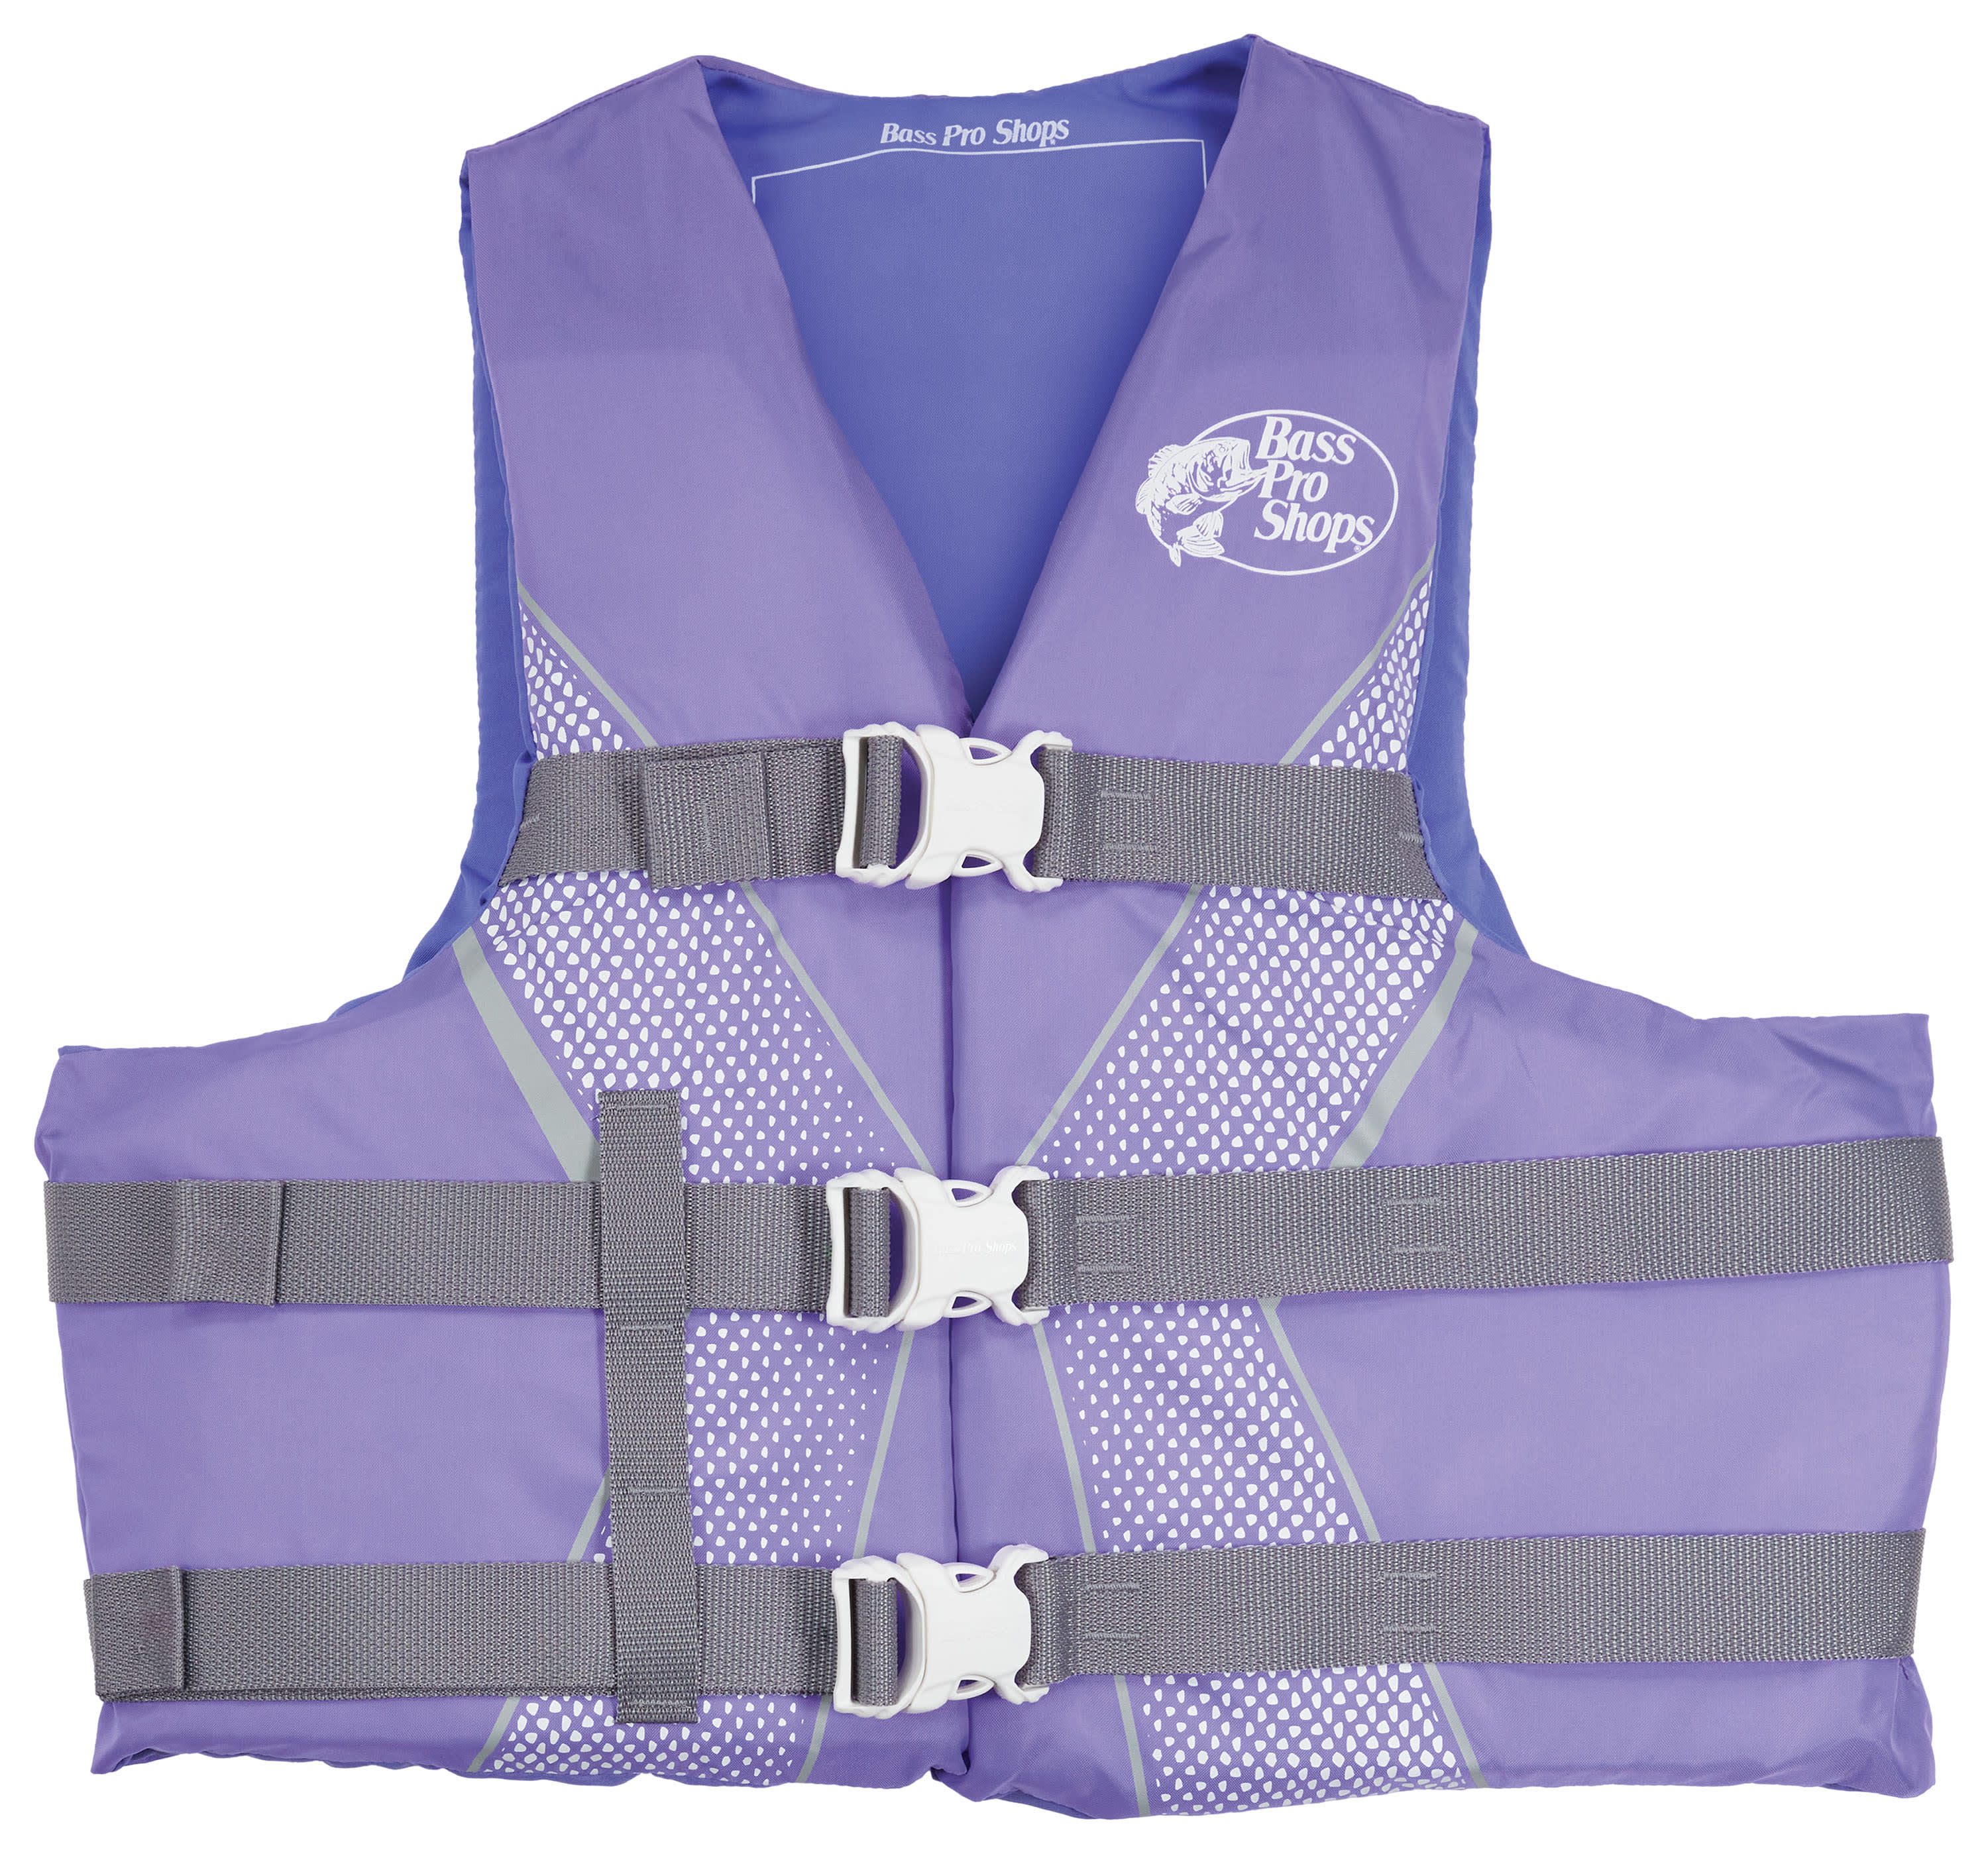 Bass Pro Shops® Recreational Life Jacket for Adults